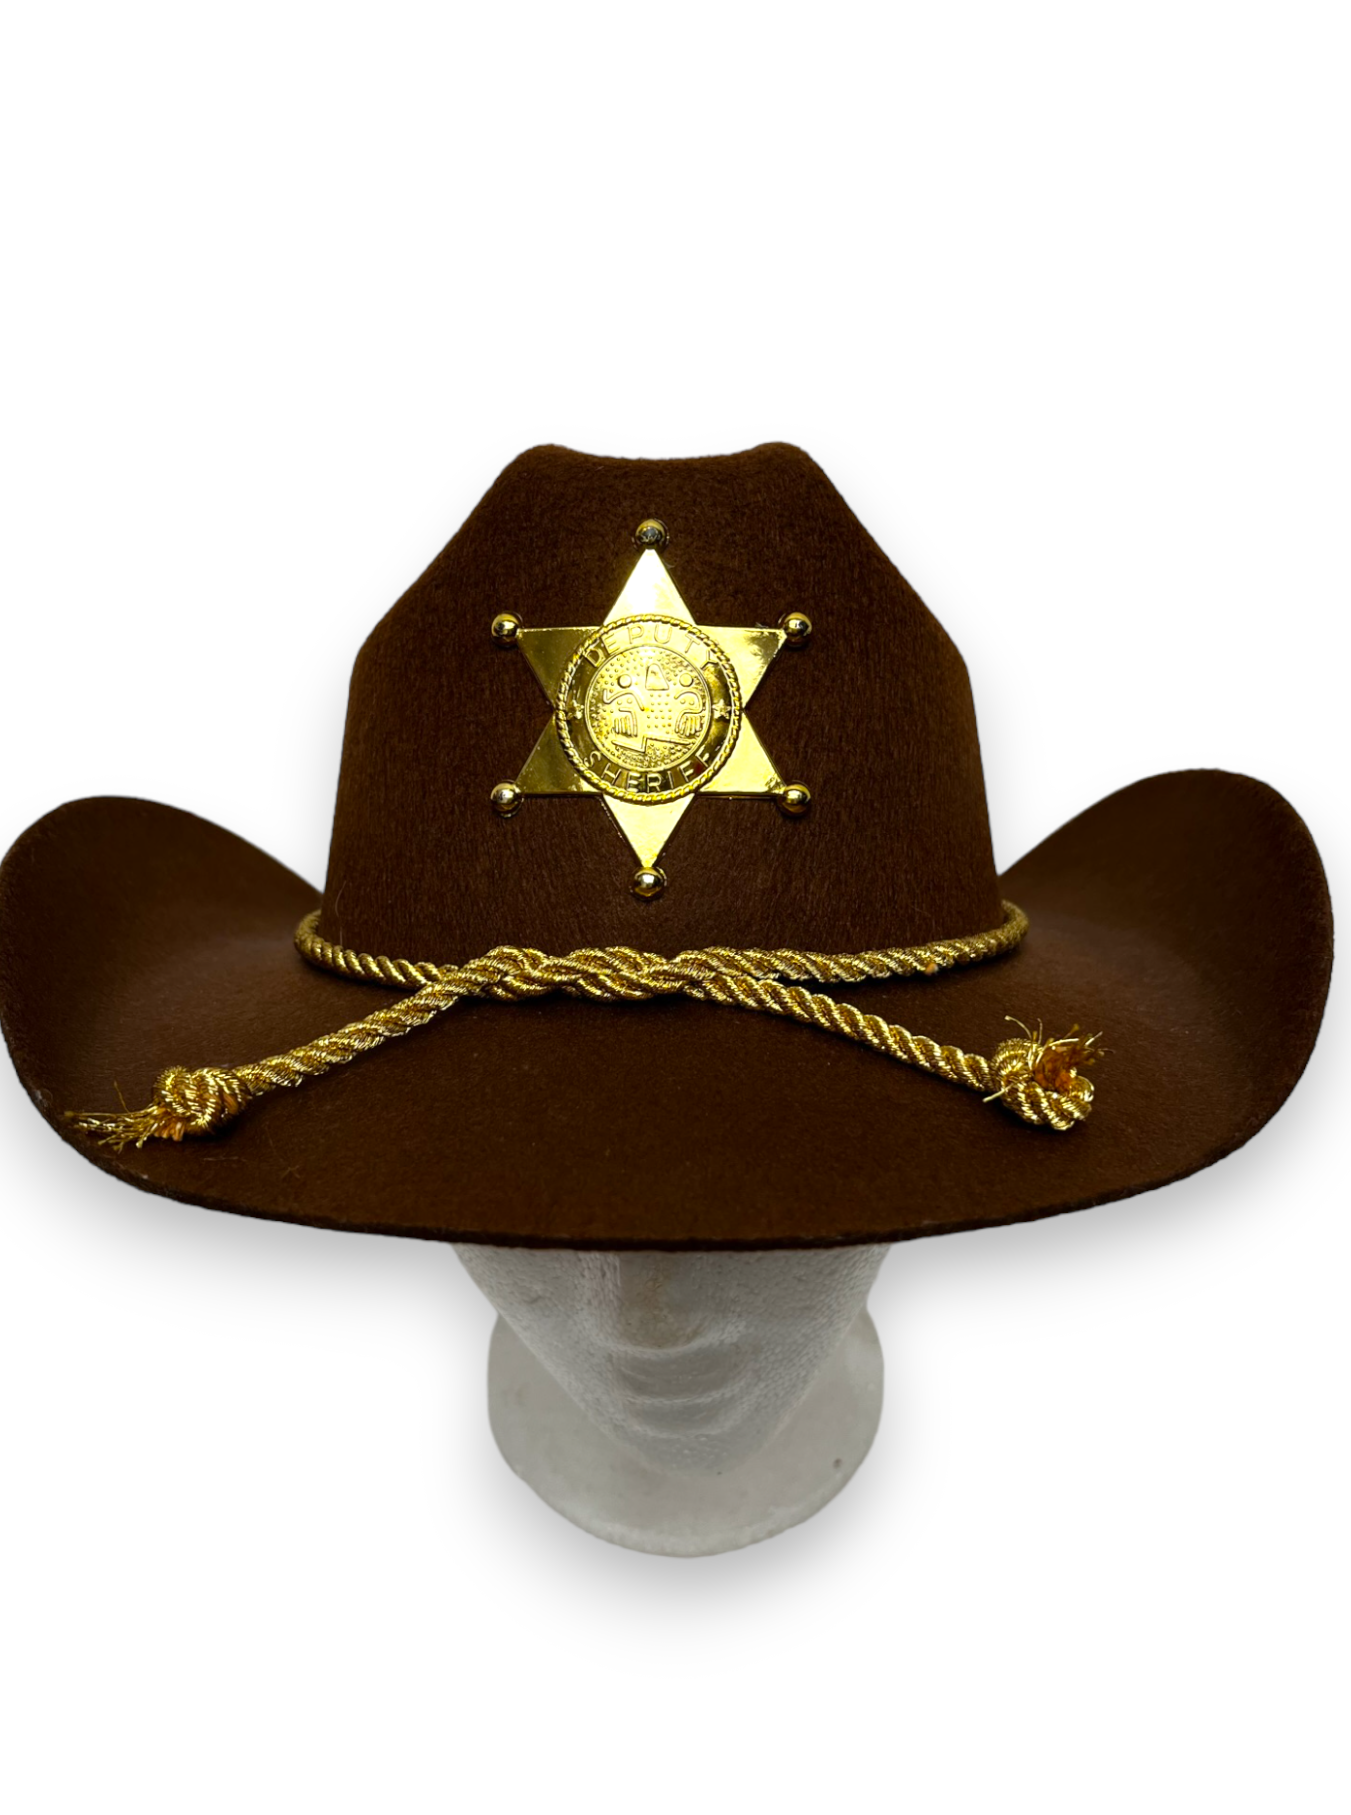 NEW with Tags - Brown Stetson Cowboy Sheriff Hat